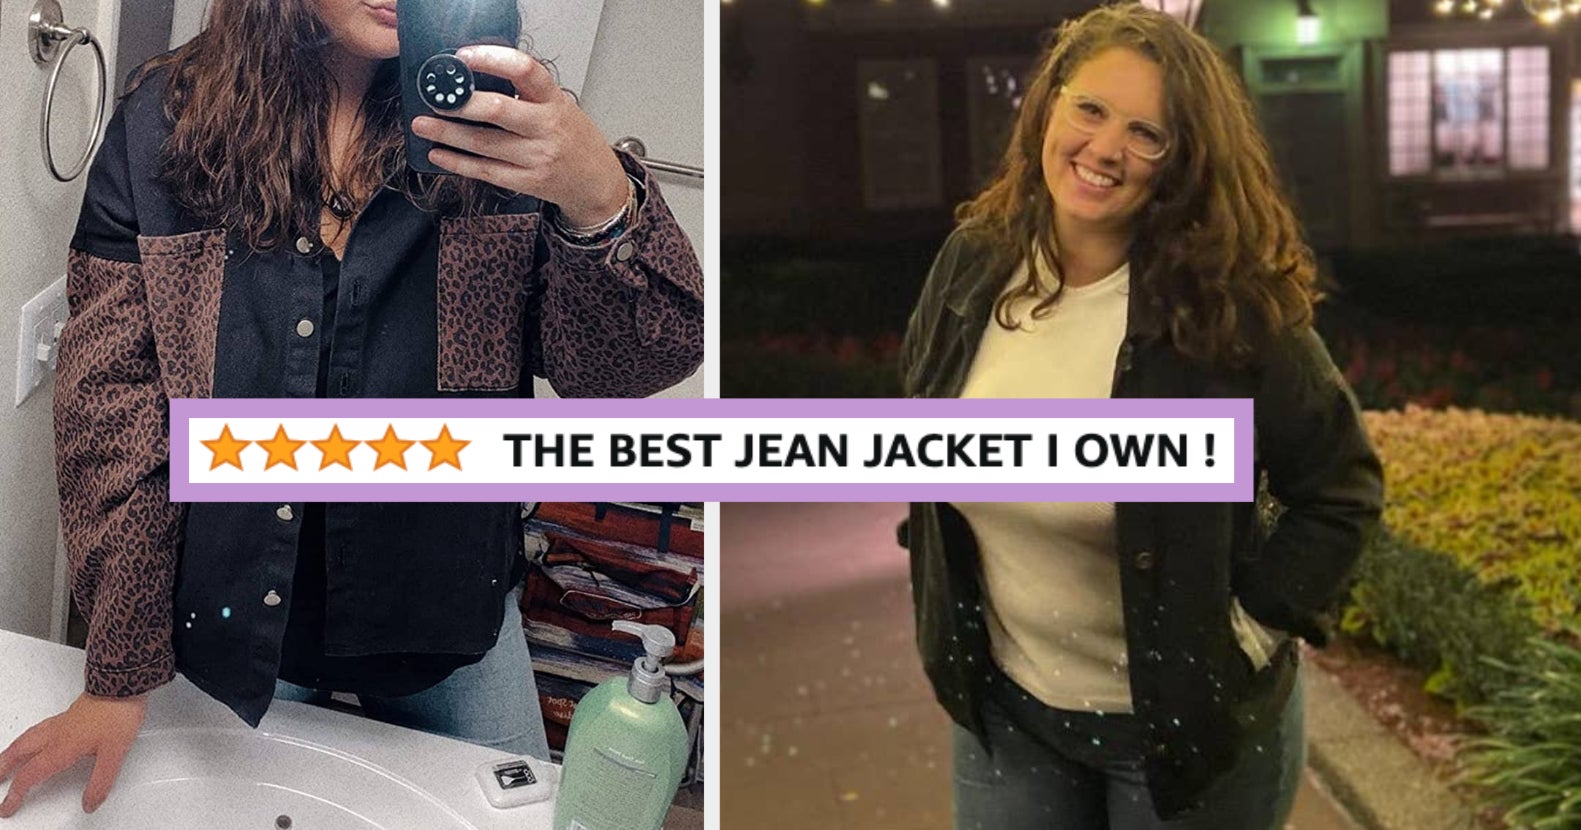 5 Jean Jacket Outfits That Are Cool in 2022